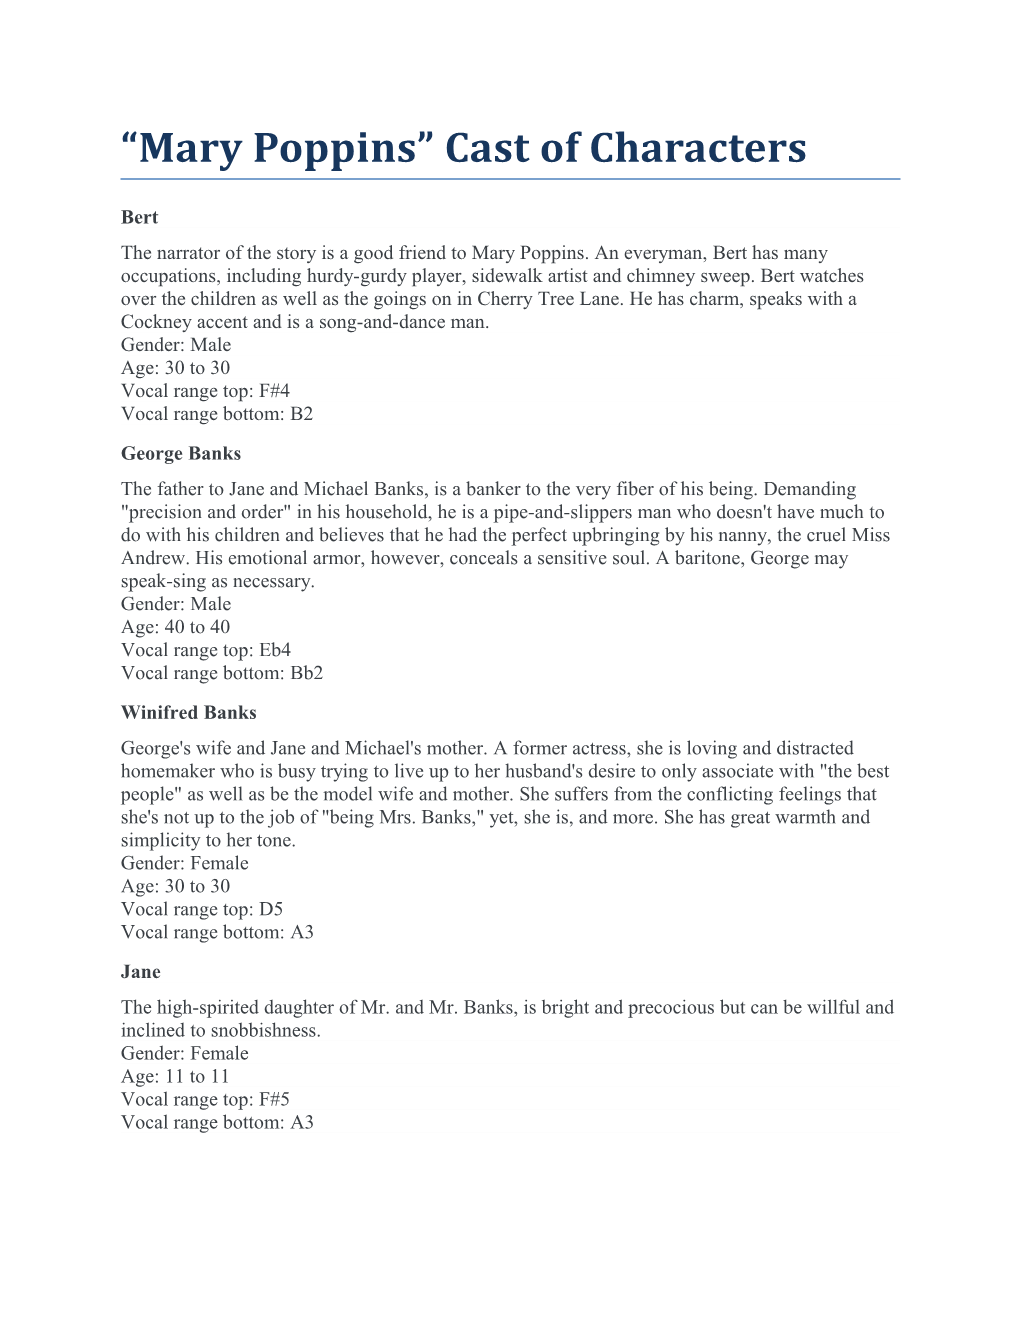 Mary Poppins Cast of Characters